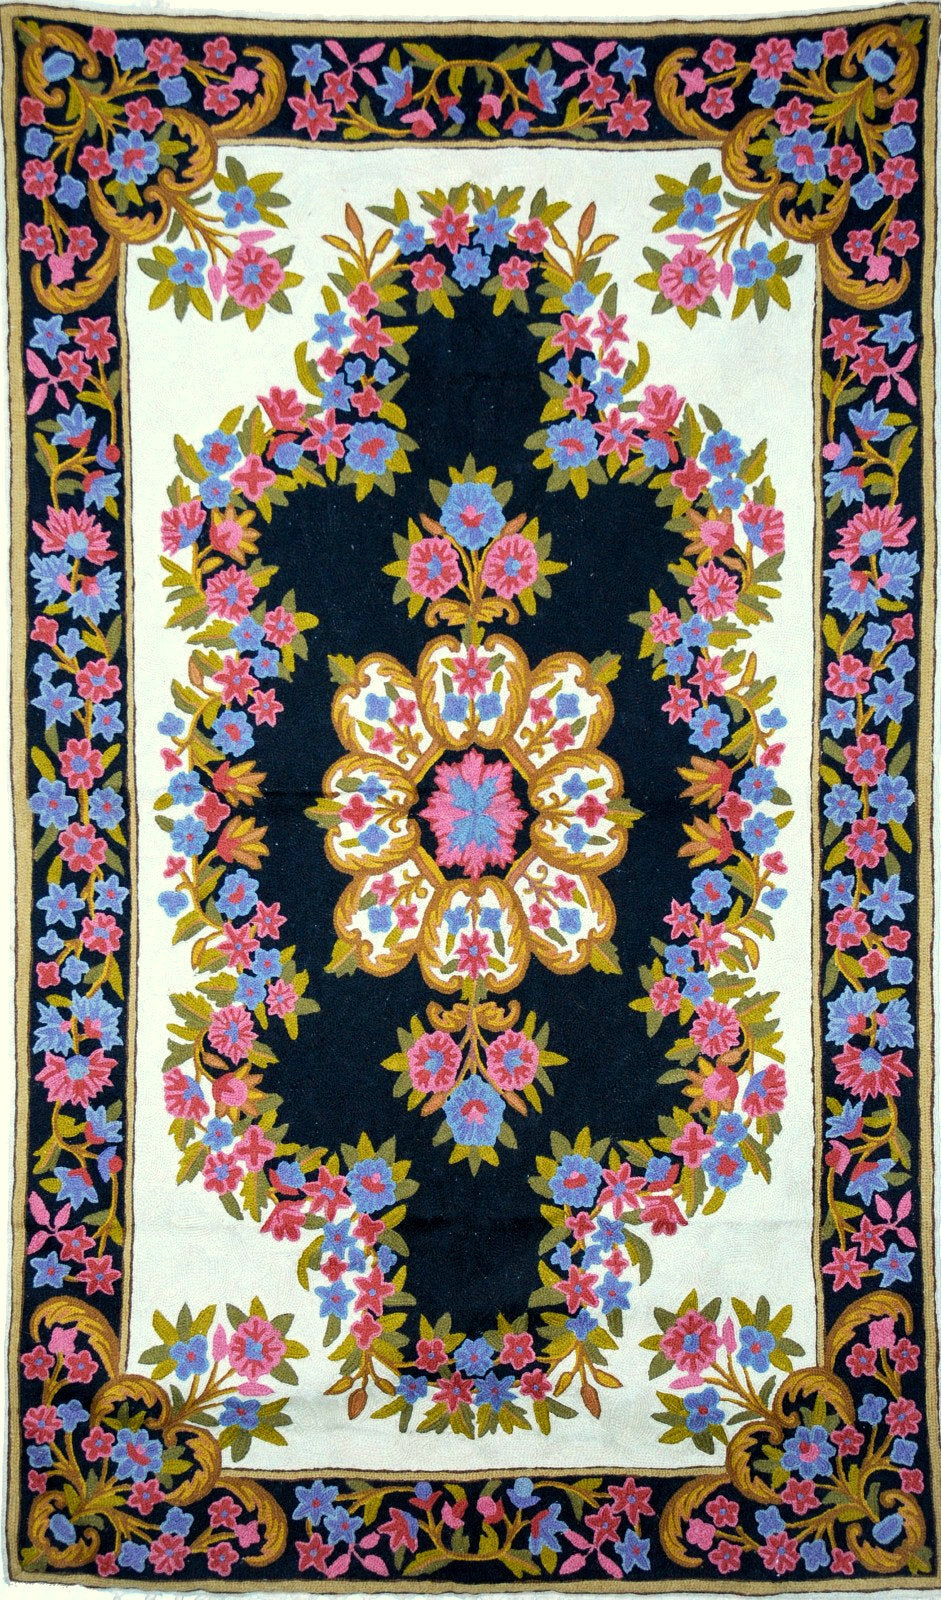 ChainStitch Tapestry Area Rug, Multicolor Wool Embroidery 3x5 feet #CWR15123